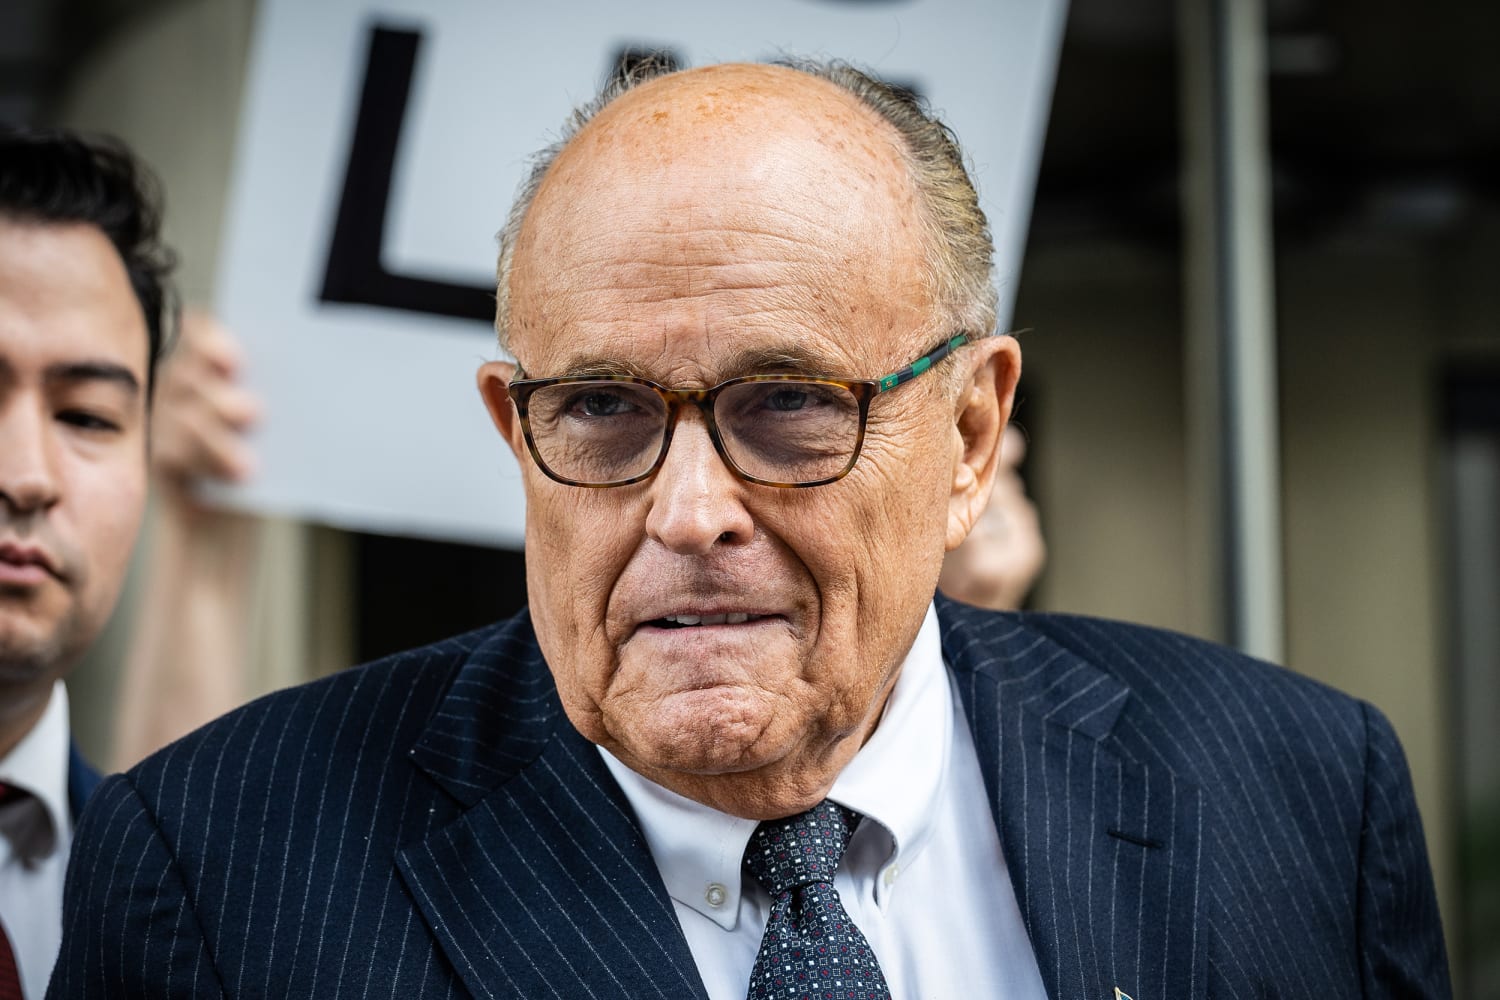 Trump is hosting a legal defense fundraiser for cash-strapped co-defendant Rudy Giuliani